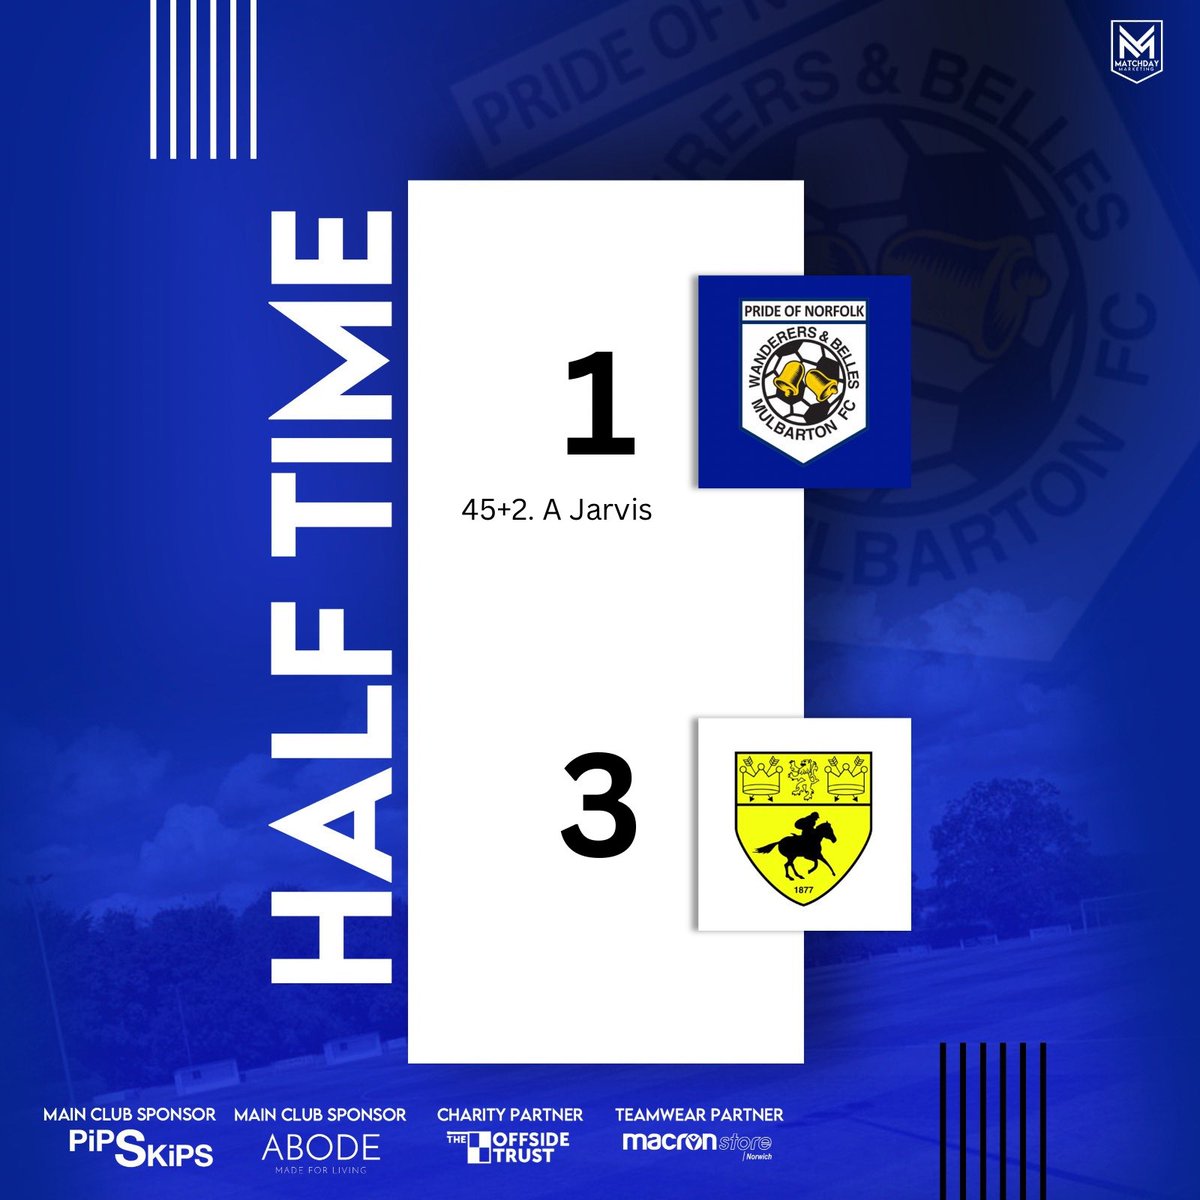 Half time whistle blows. Some early chances missed. @NewmarketTownFC capitalise on their opportunities but @Ash_Jarvis nicks one to cut the deficit.